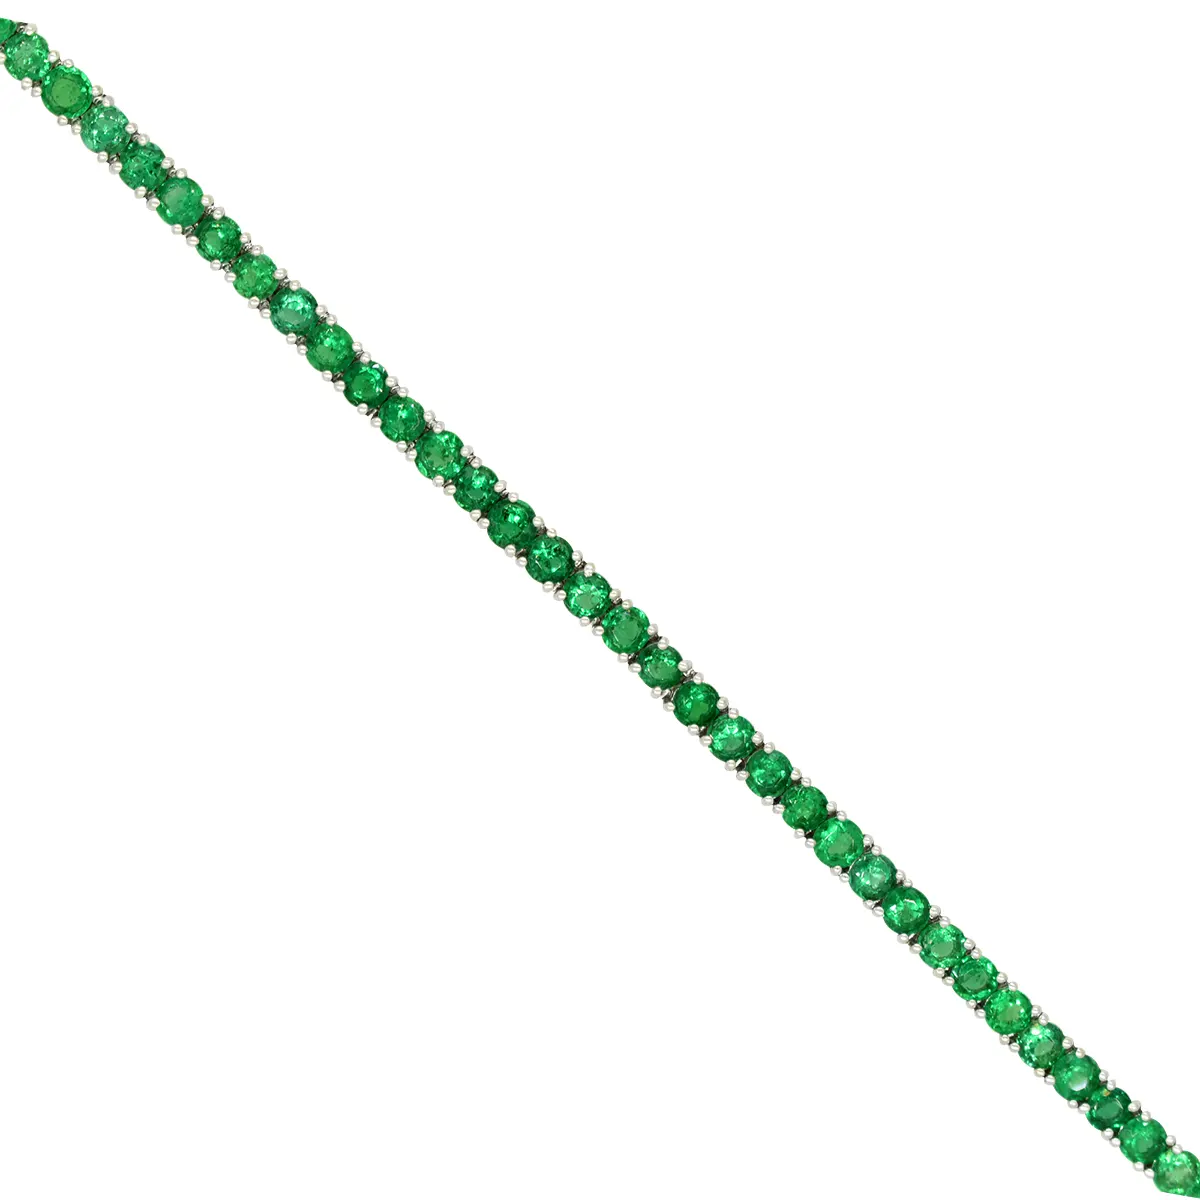 Emerald Tennis Bracelet in 18K White Gold With Round Natural Emeralds